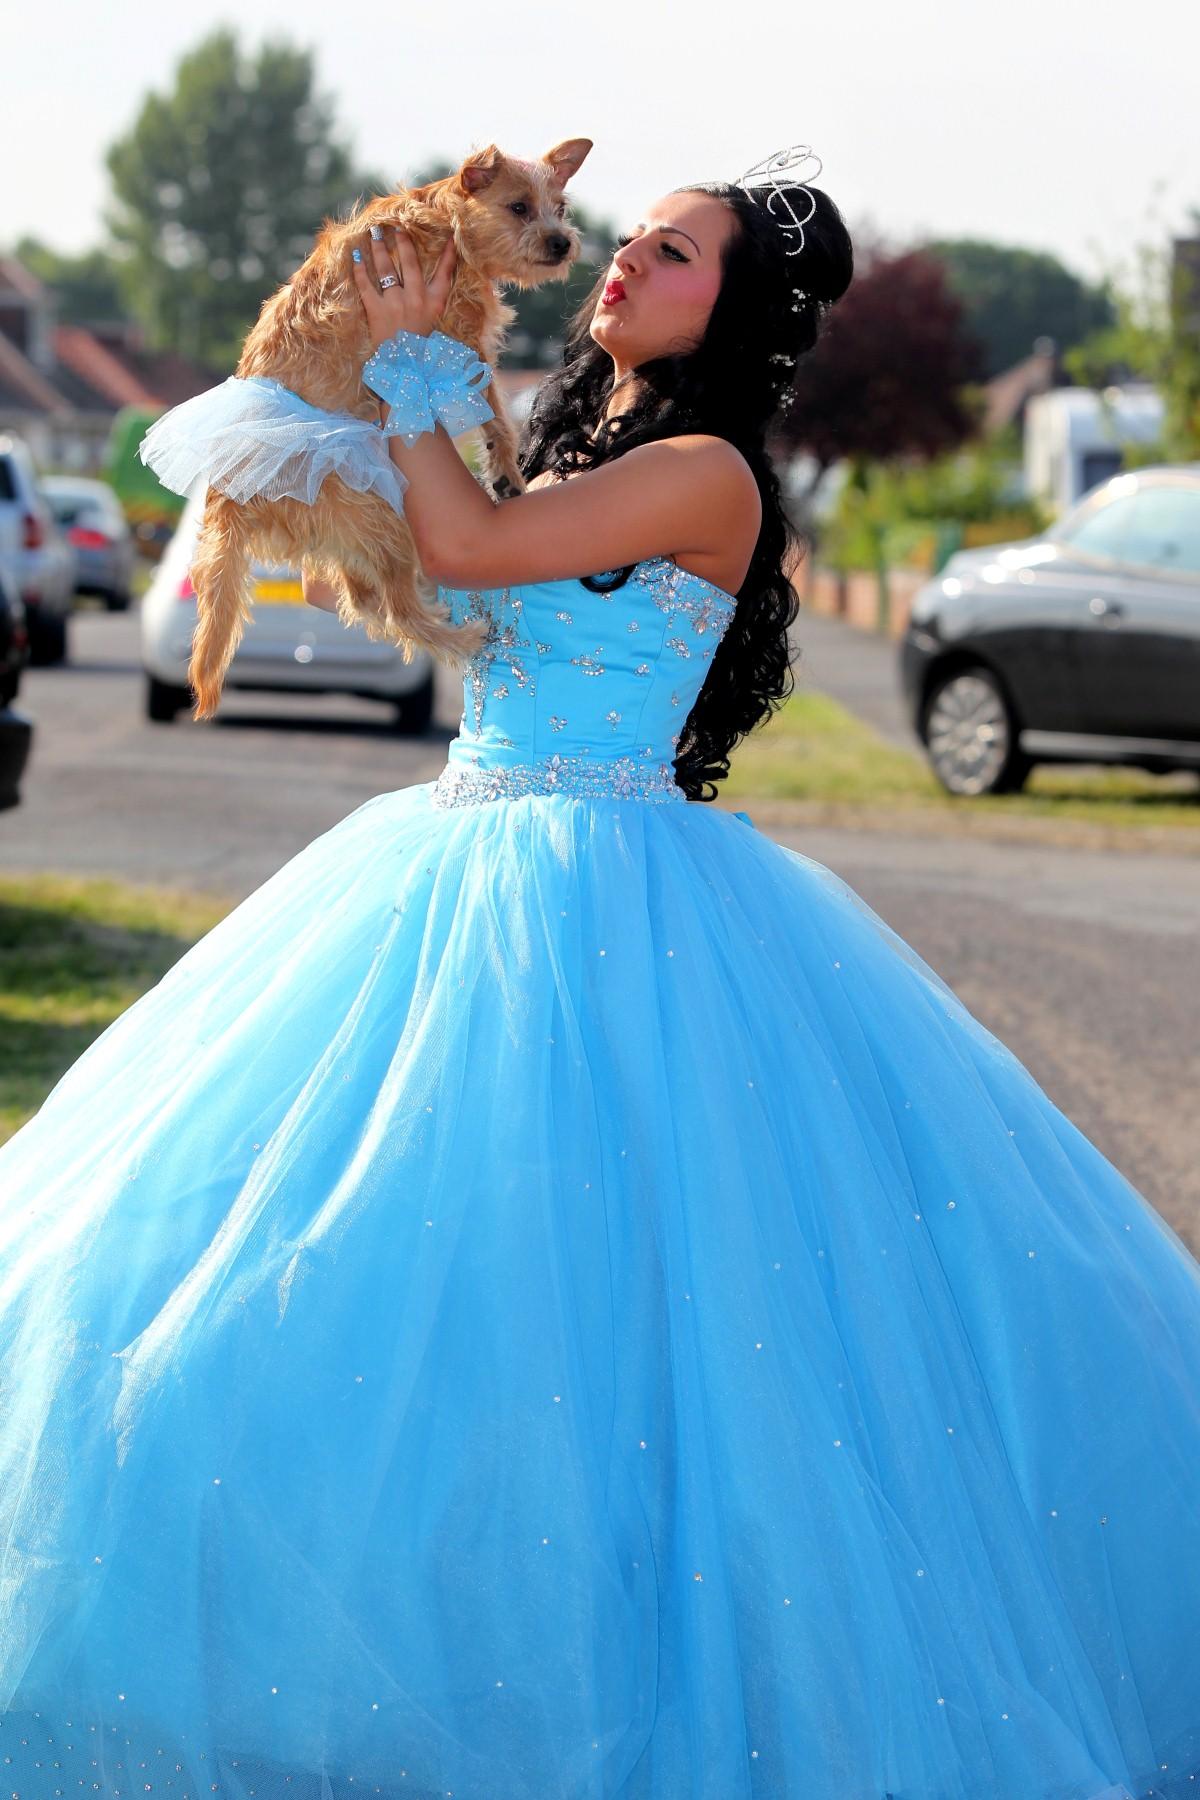 The Year in Pictures - 2013 - Molly Cooper-Lawson with her dog Dolly before she set off for her prom. July 5, 2013.